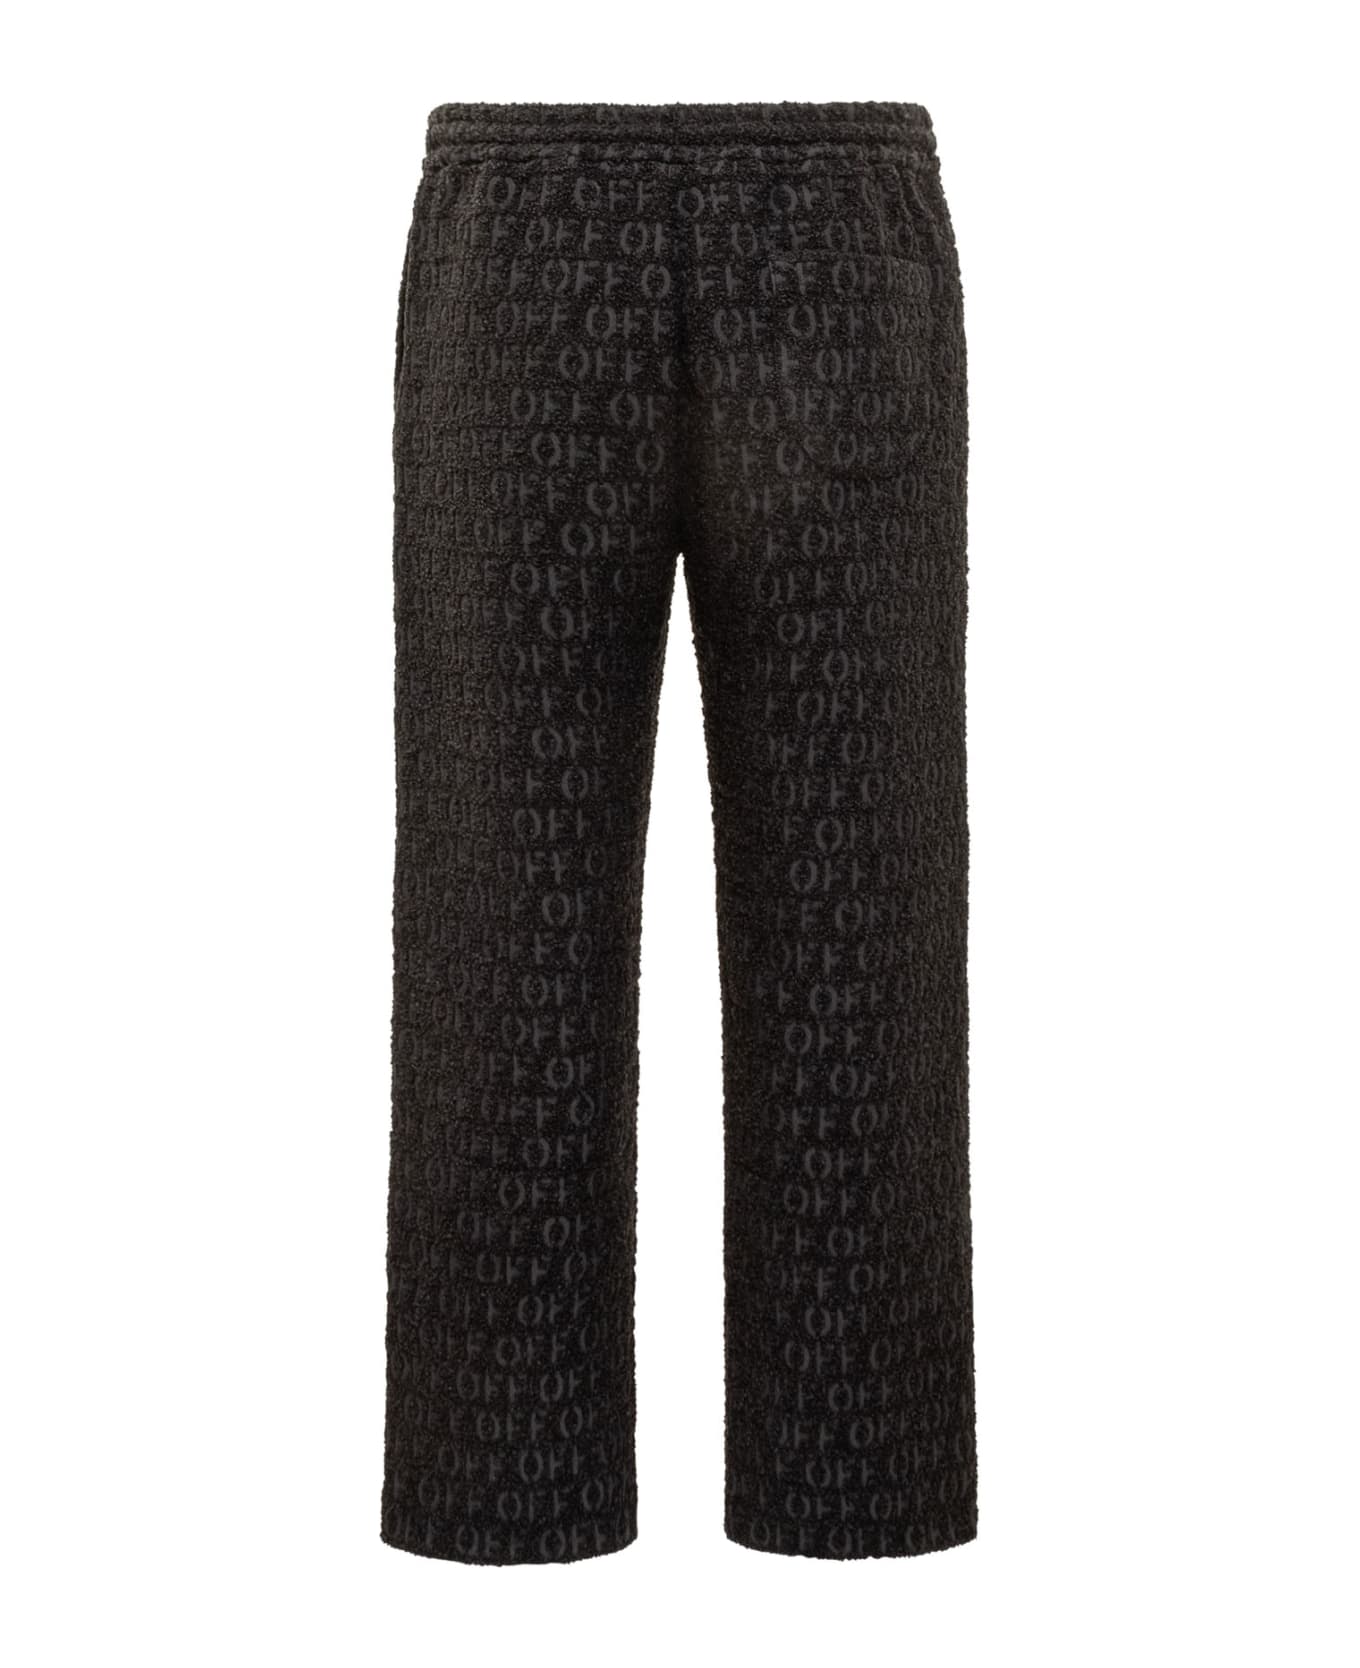 Off-White Knitted Trousers - black